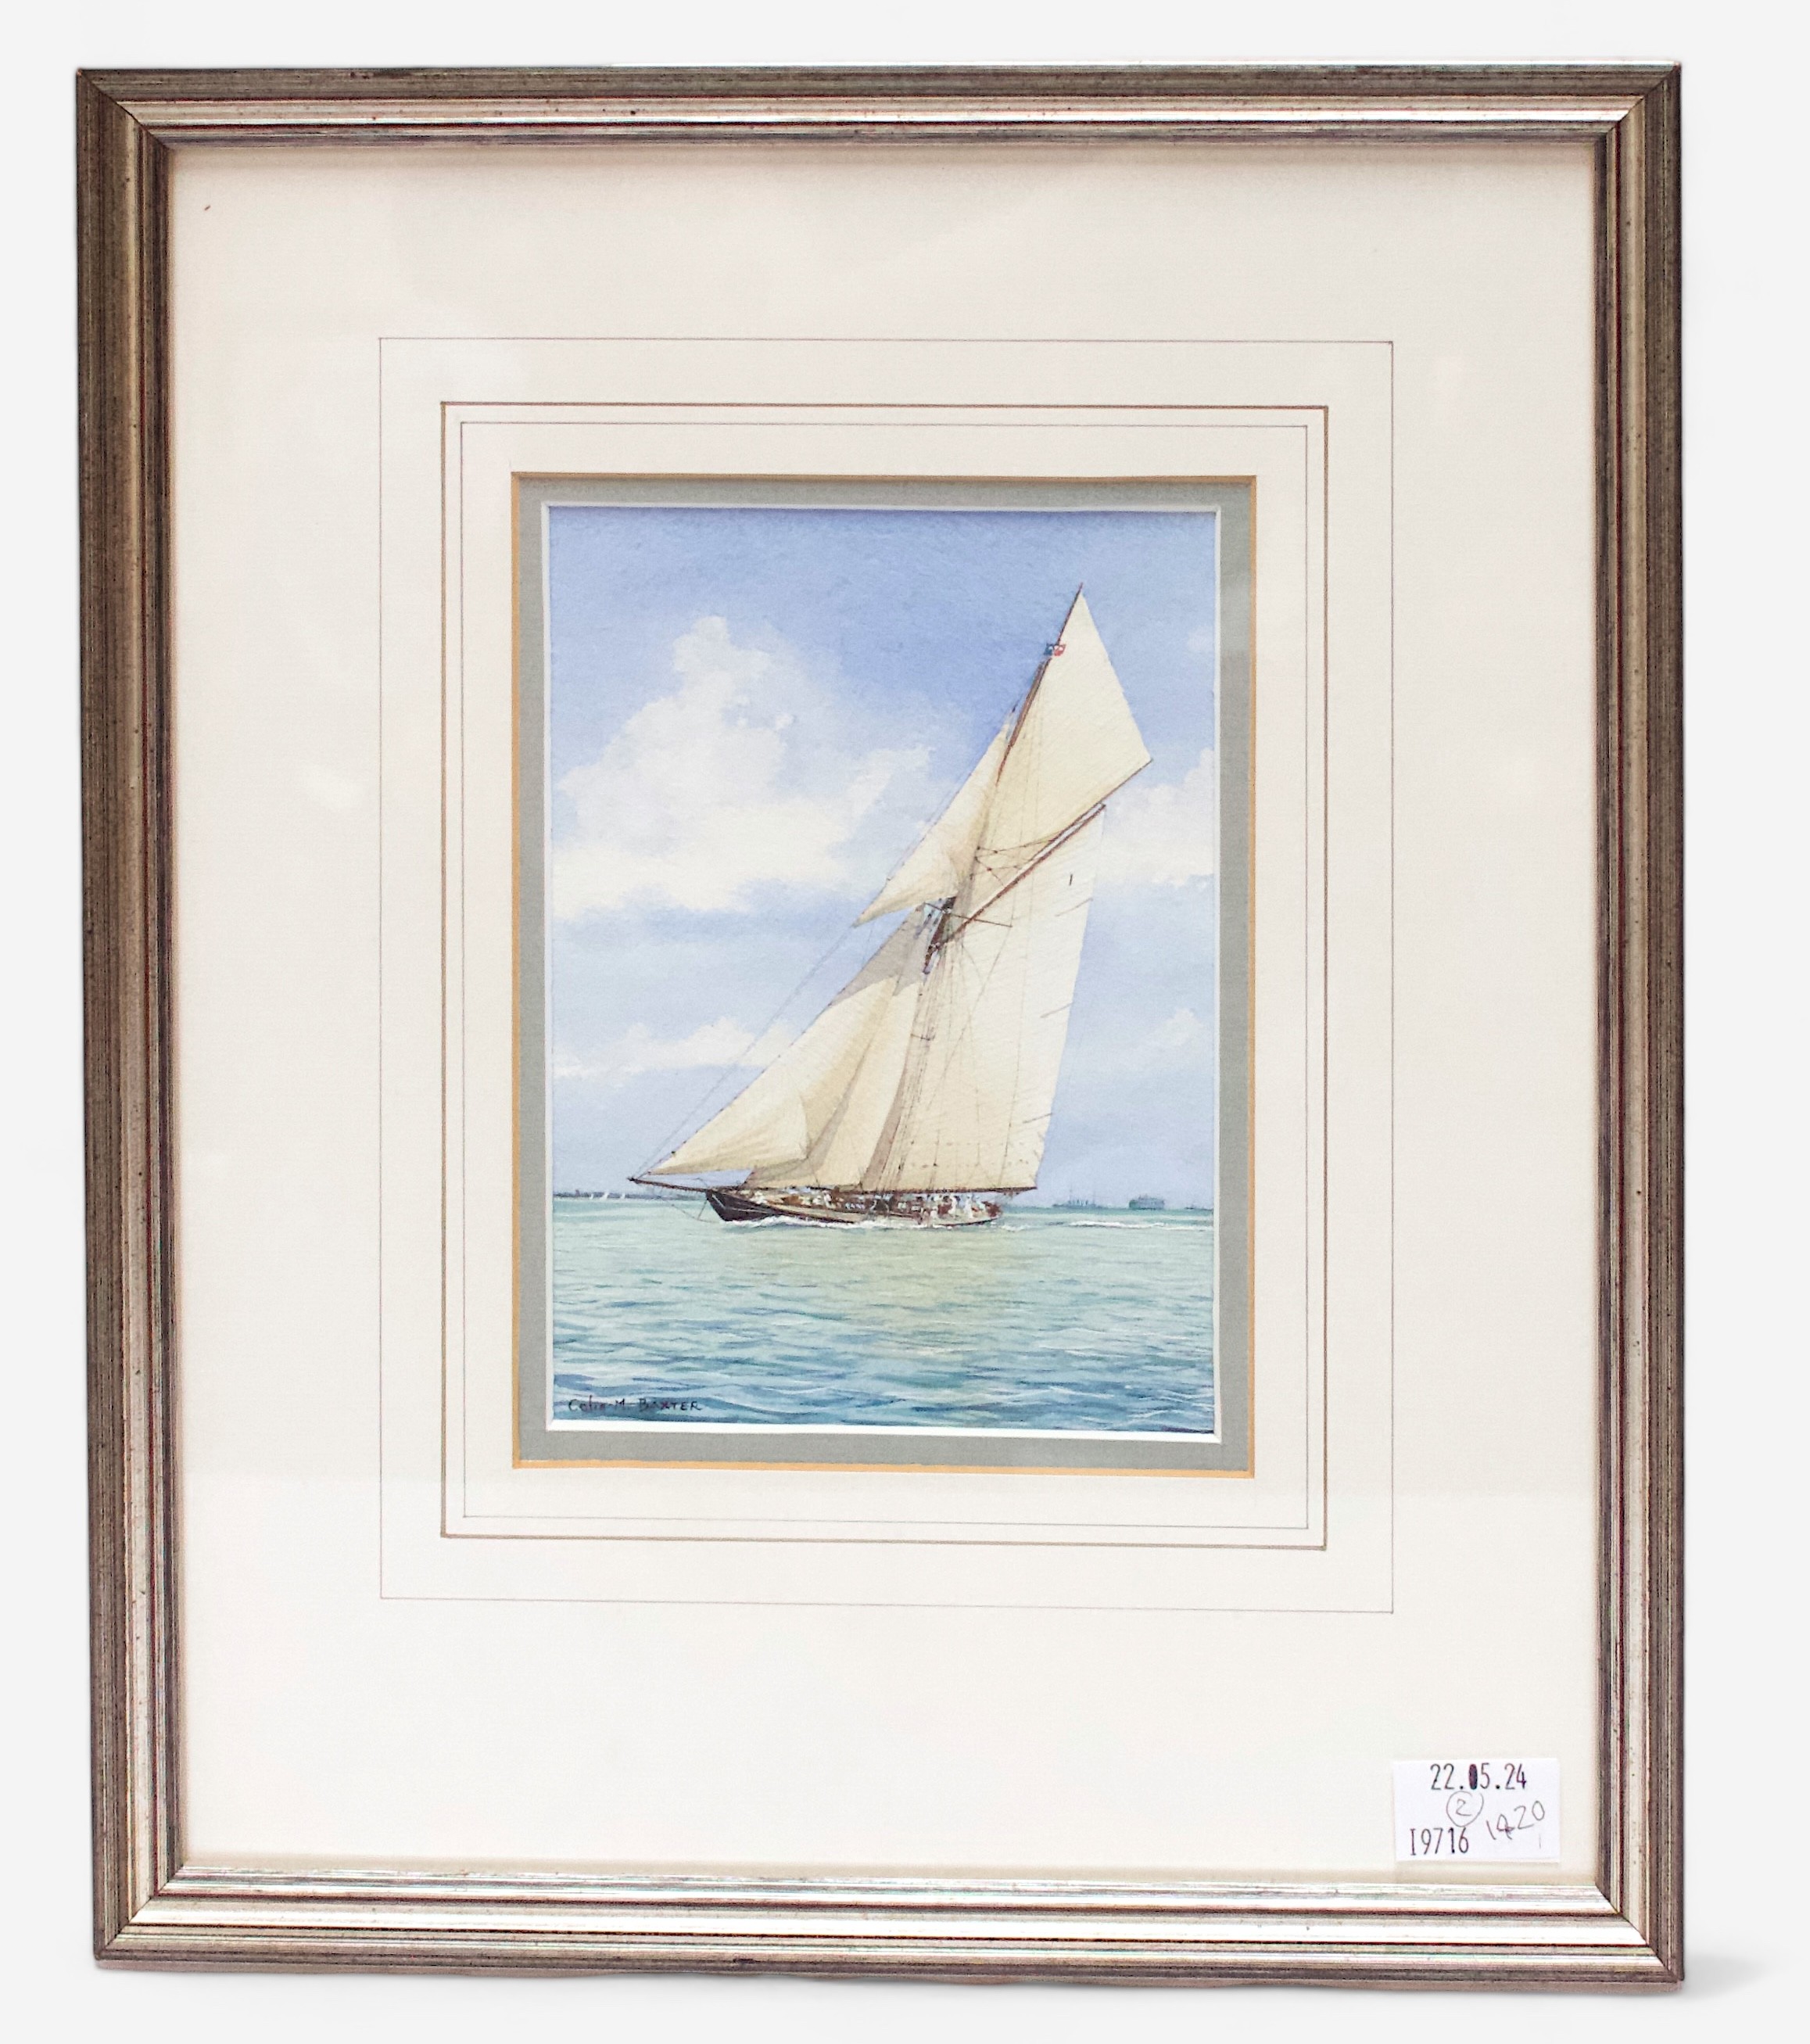 Colin M. Baxter. An original blank menu from the Royal Yacht Victoria & Albert painted with a - Image 3 of 3